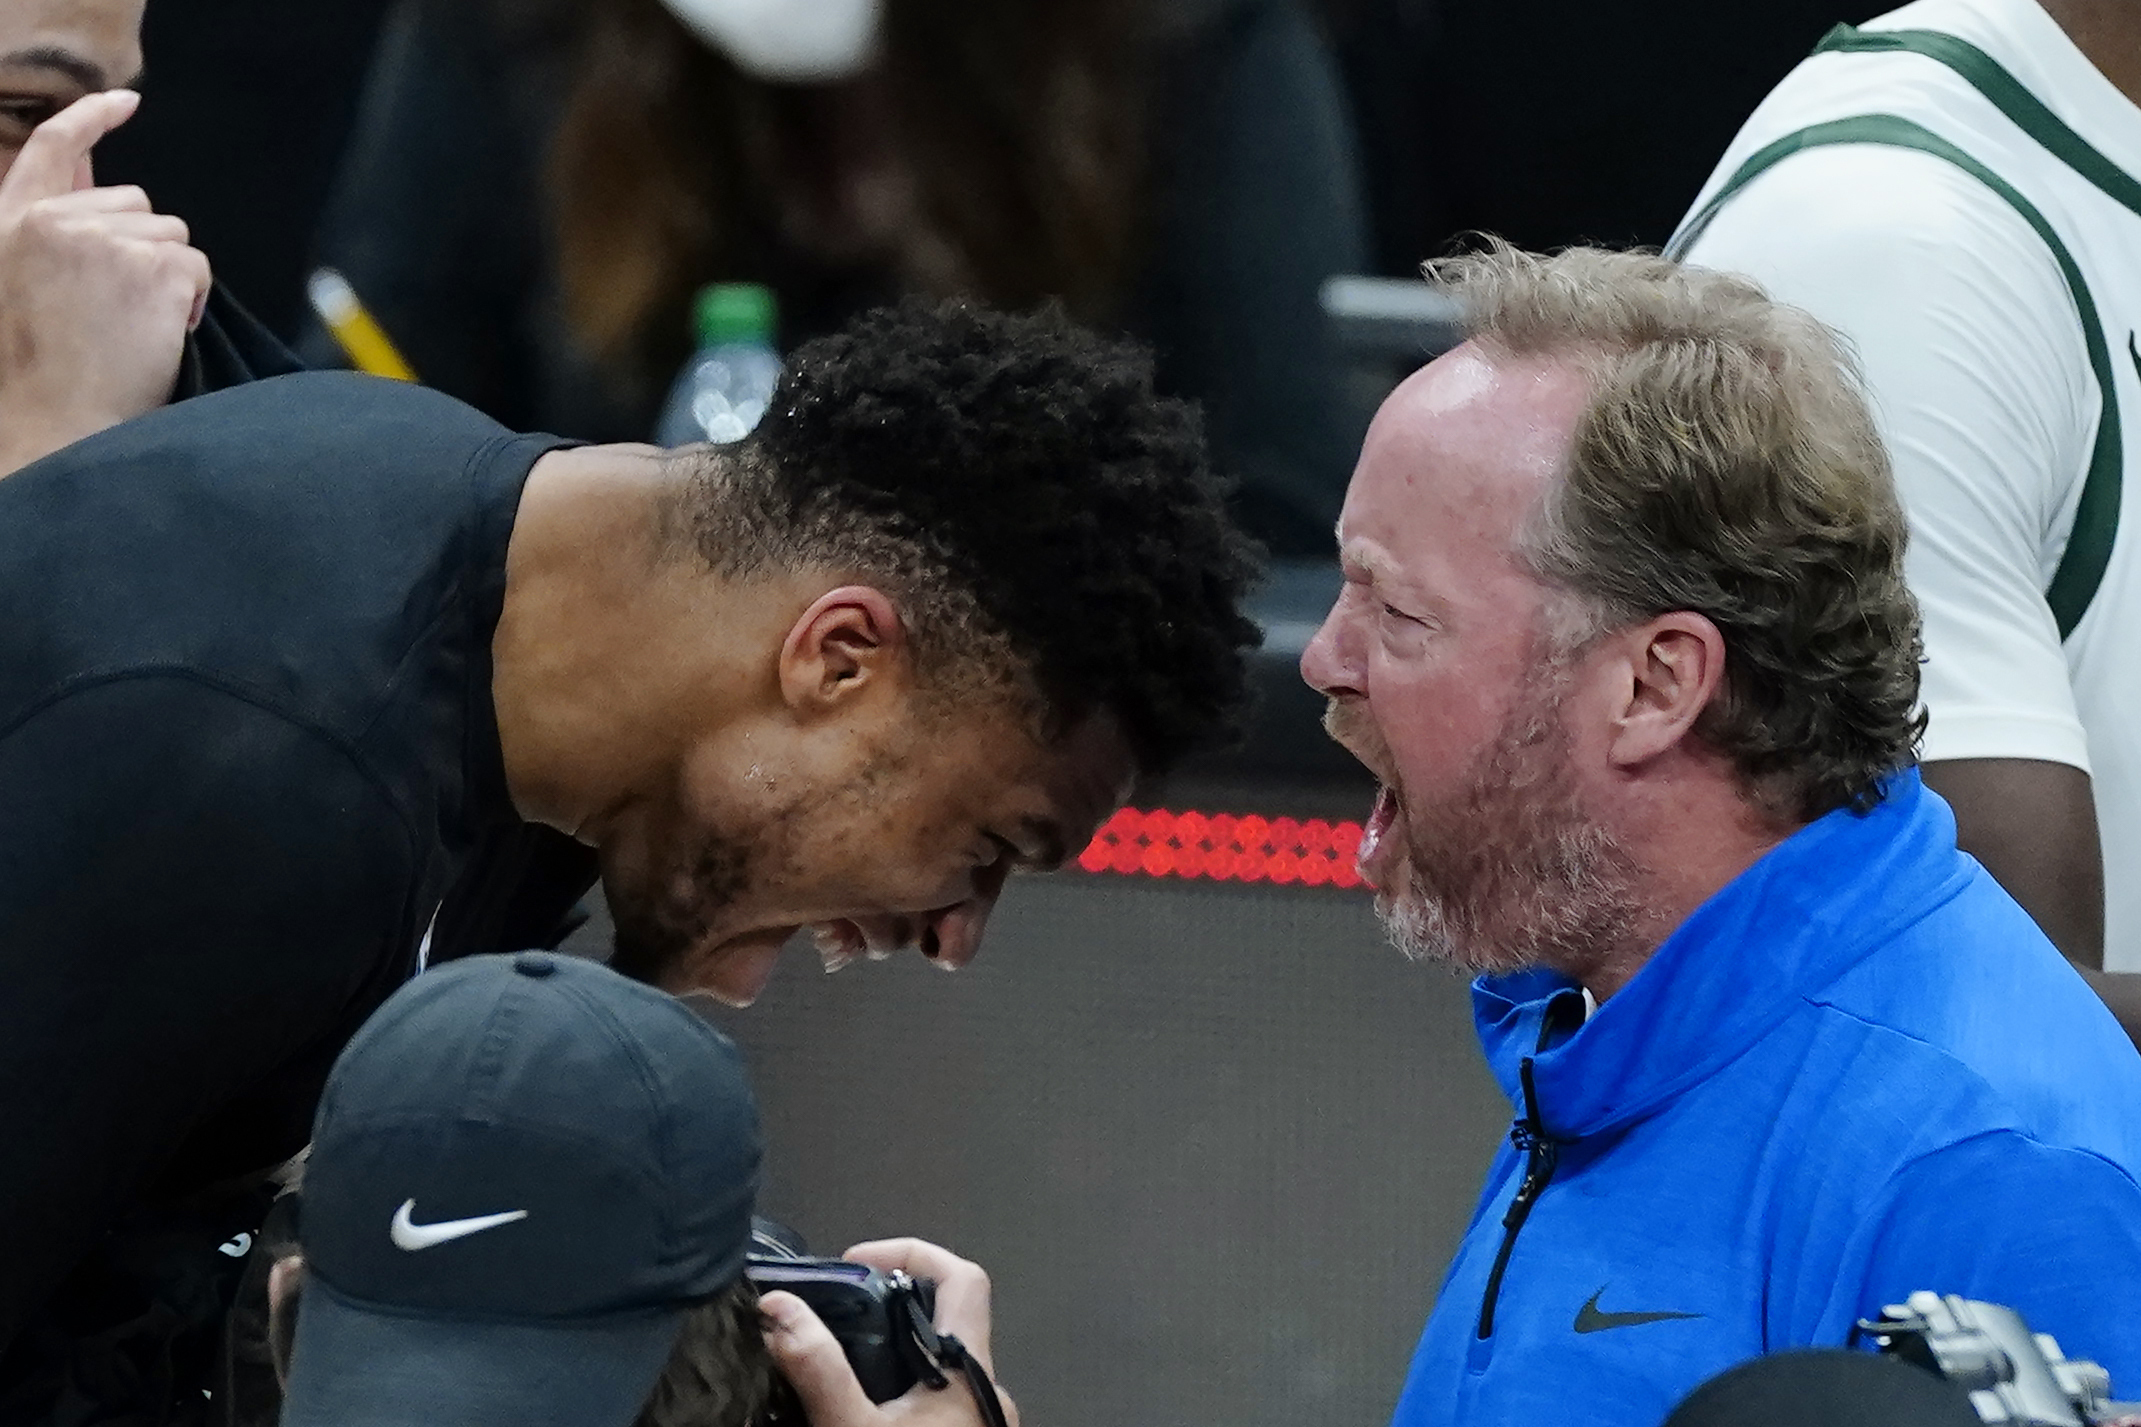 Milwaukee Bucks coach Mike Budenholzer and inured forward Giannis Antetokounmpo celebrate after the Bucks defeated the Atlanta Hawks in Game 6 of the Eastern Conference finals in the NBA basketball playoffs, advancing to the NBA Finals, Saturday, July 3, 2021, in Atlanta. (AP Photo/John Bazemore)